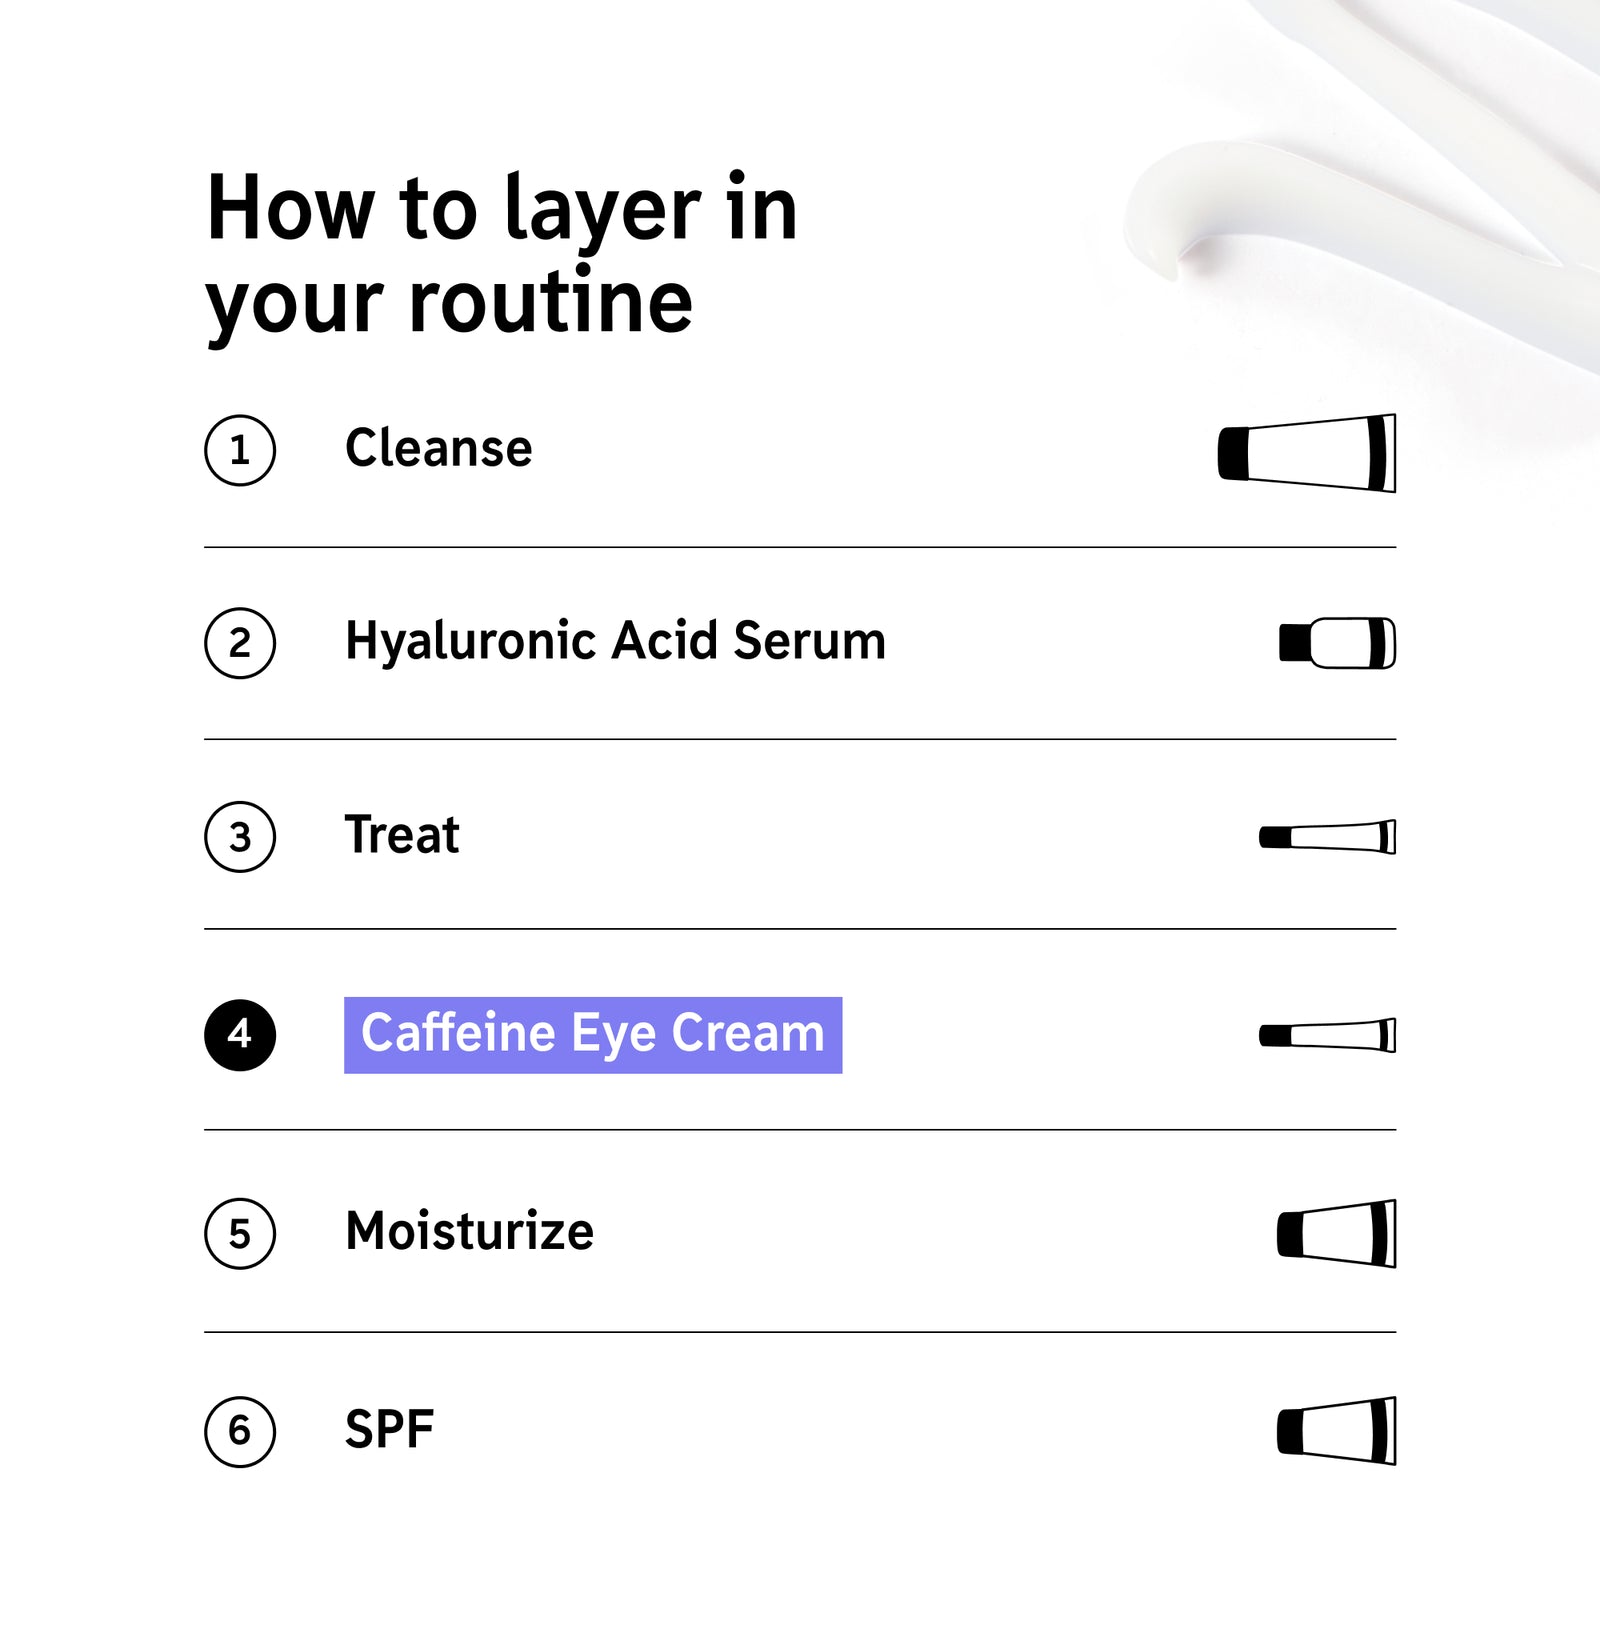 How to layer Caffeien Eye Cream in your routine